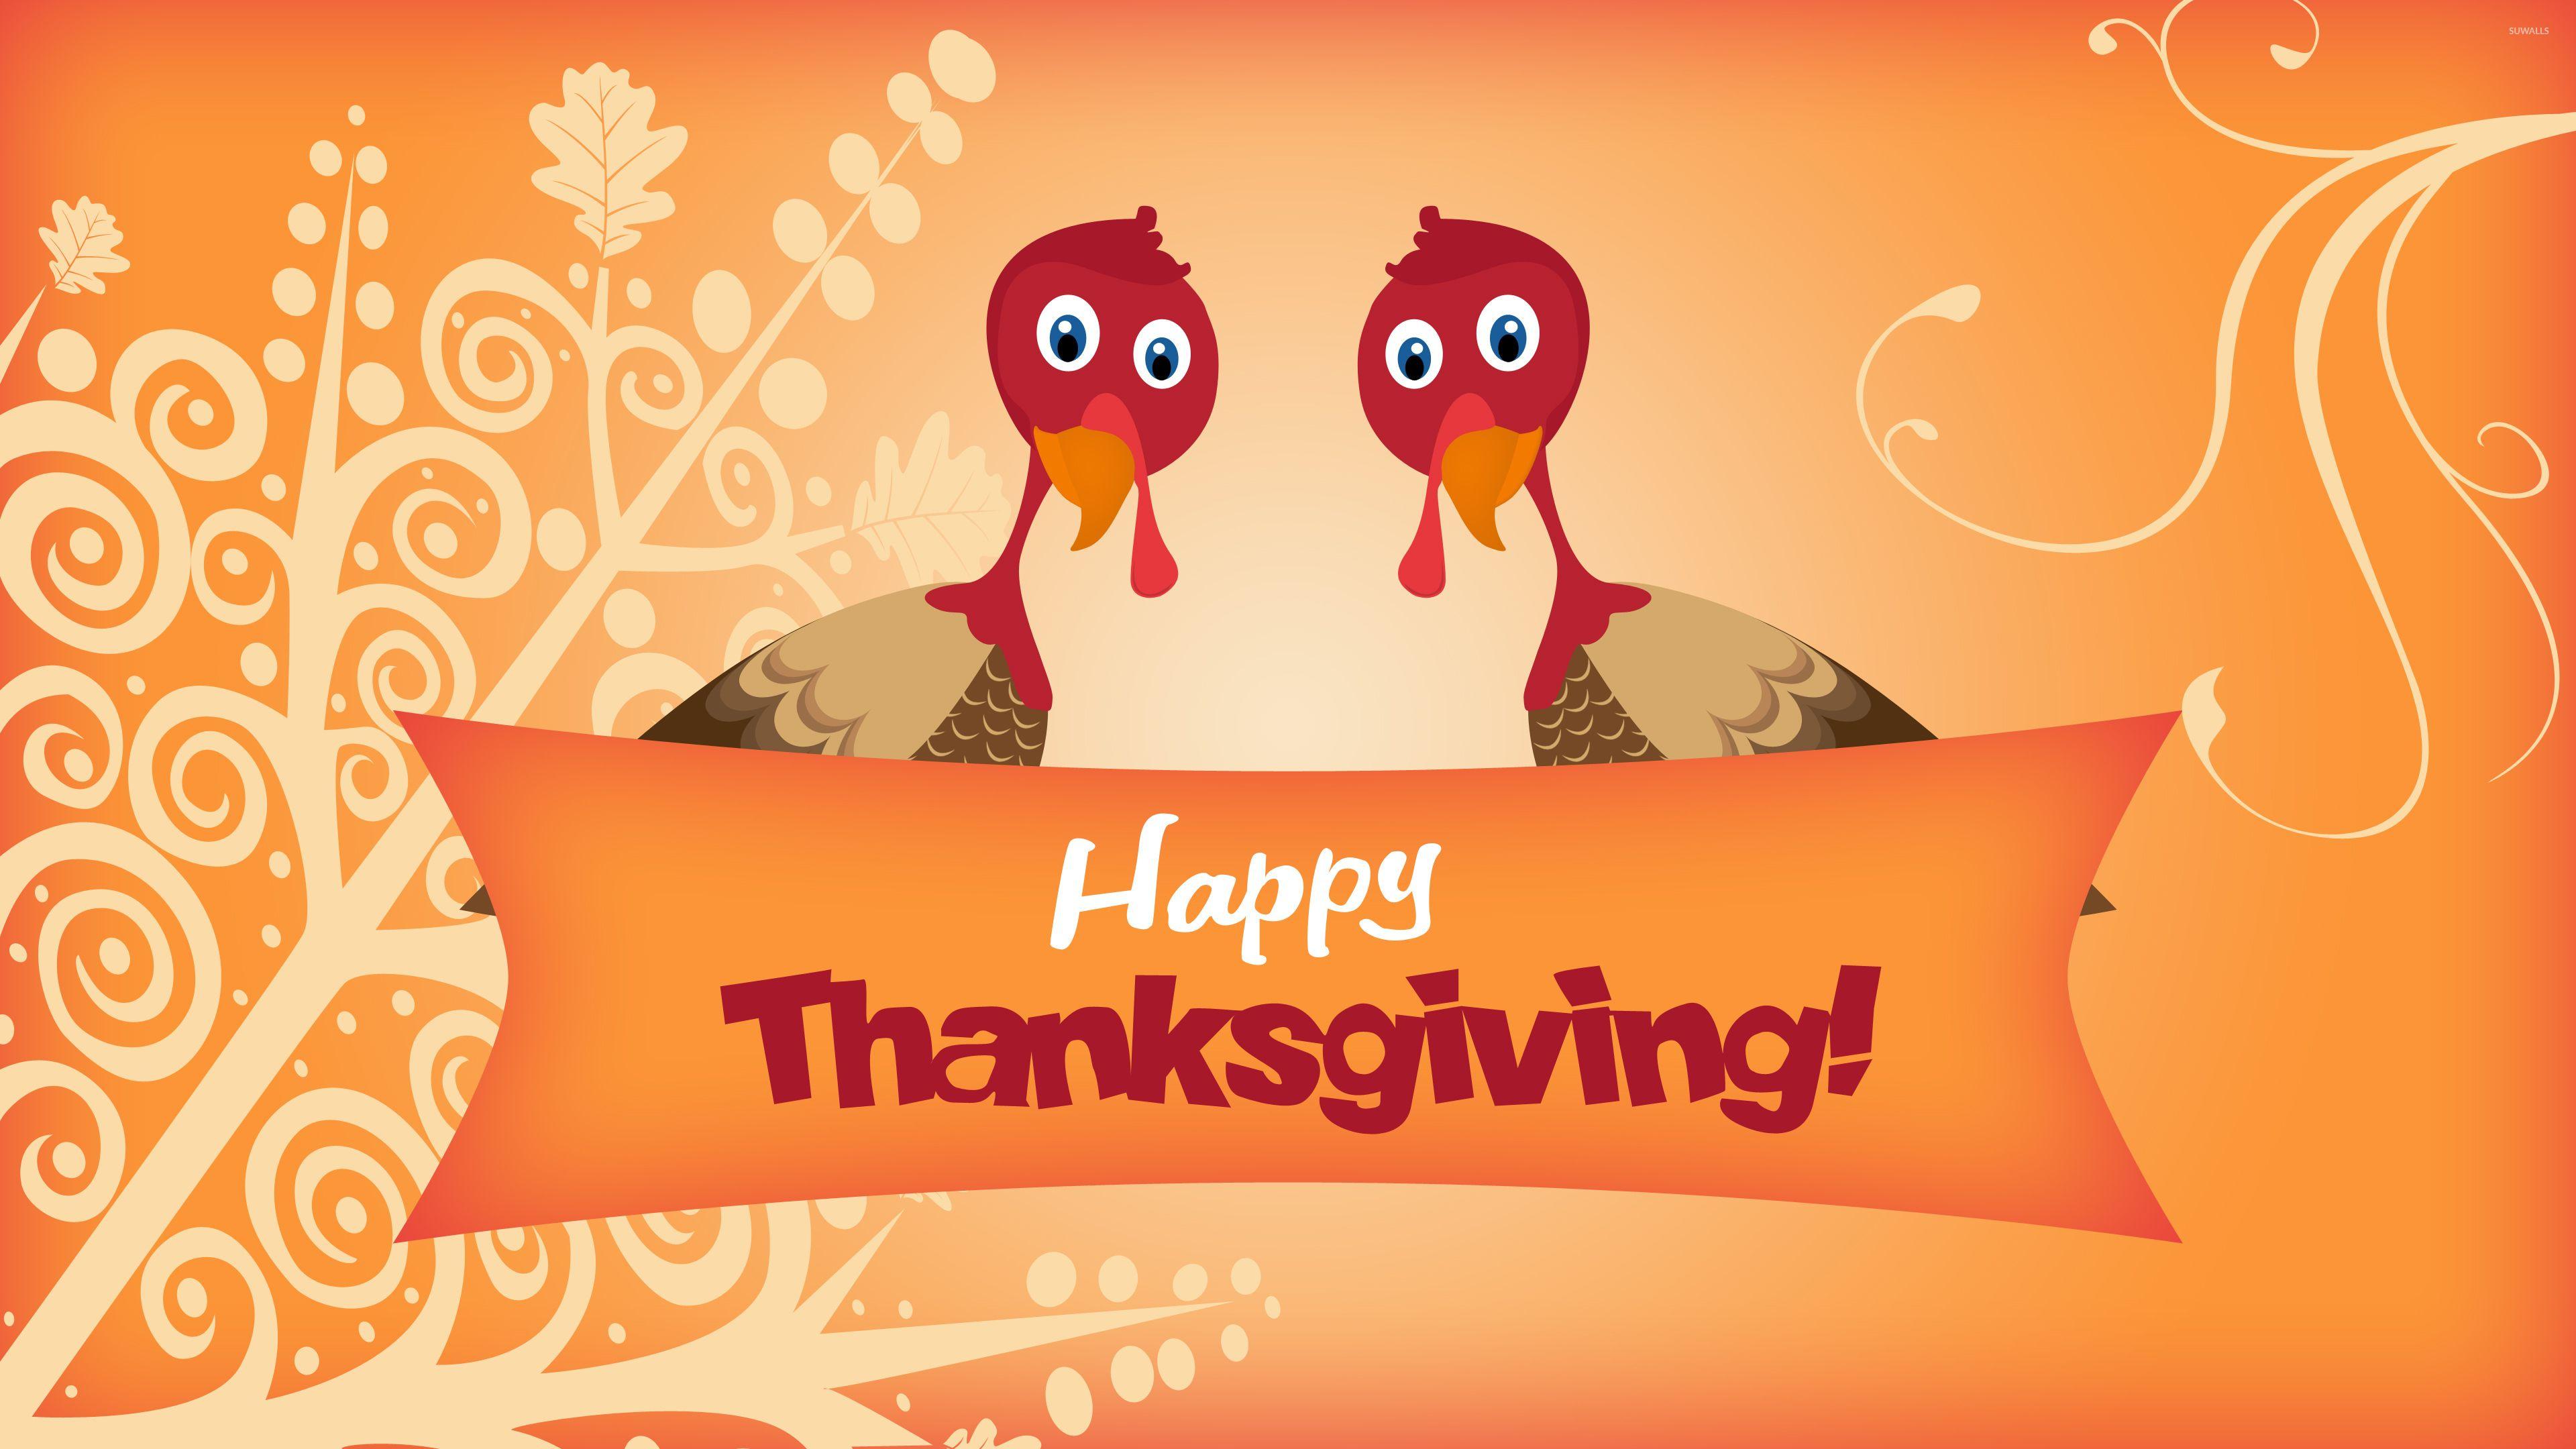 Happy Thanksgiving Eve Image Picture & Wallpaper Collection